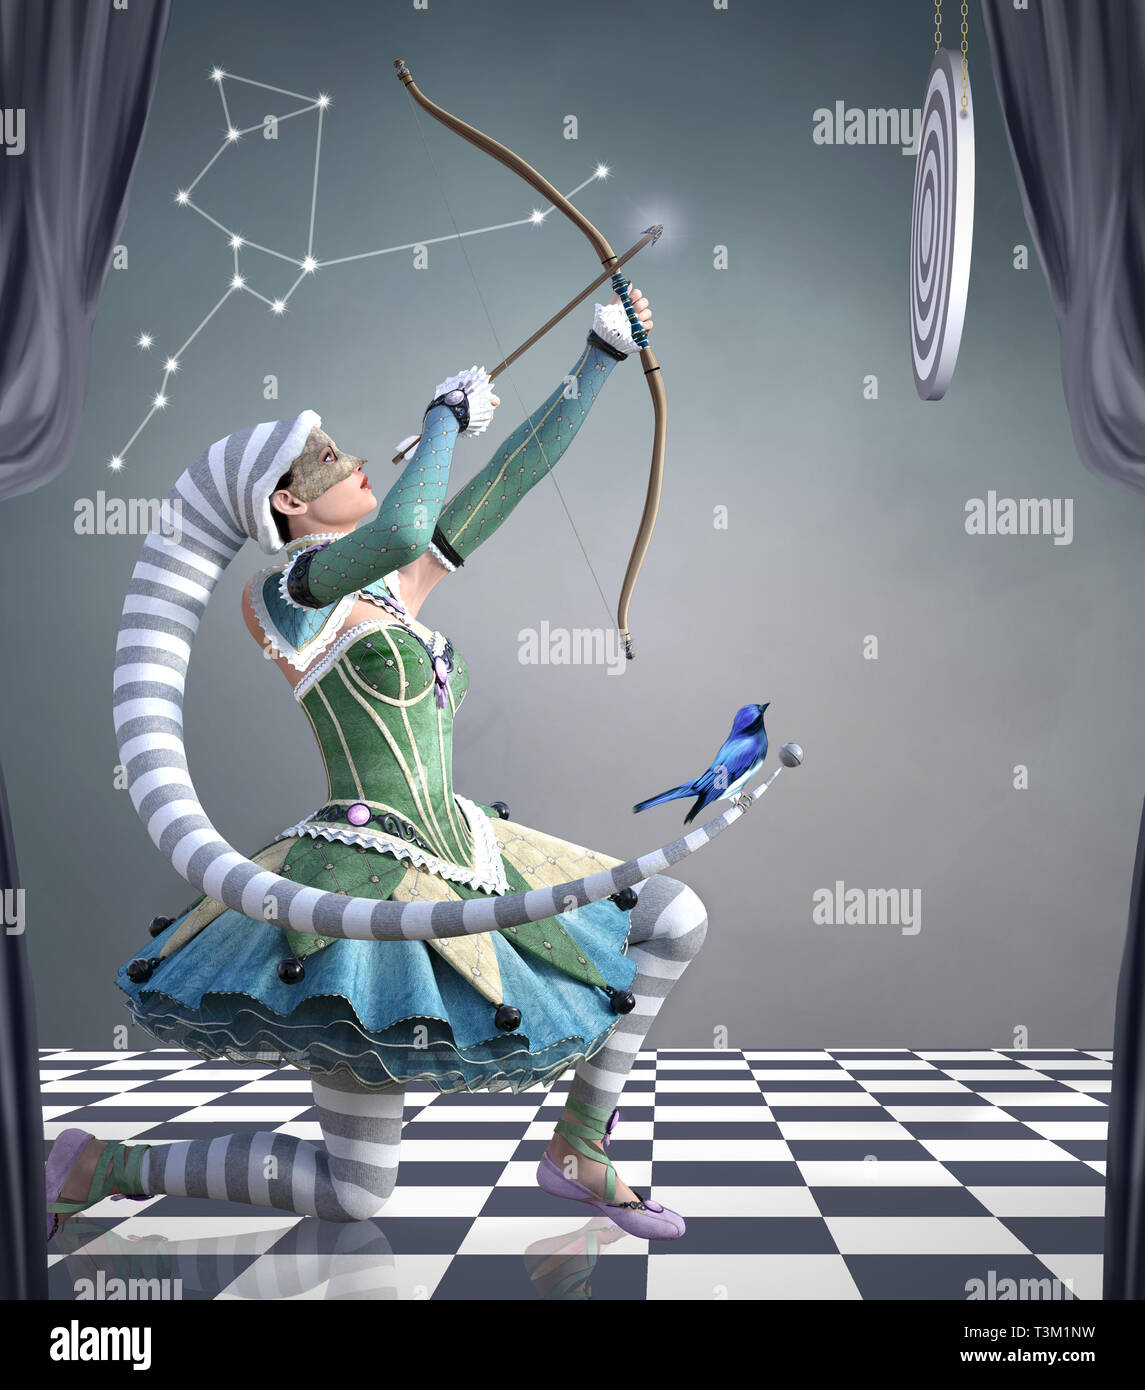 zodiac-series-sagittarius-as-a-beautiful-jester-with-arc-and-target-T3M1NW.jpg